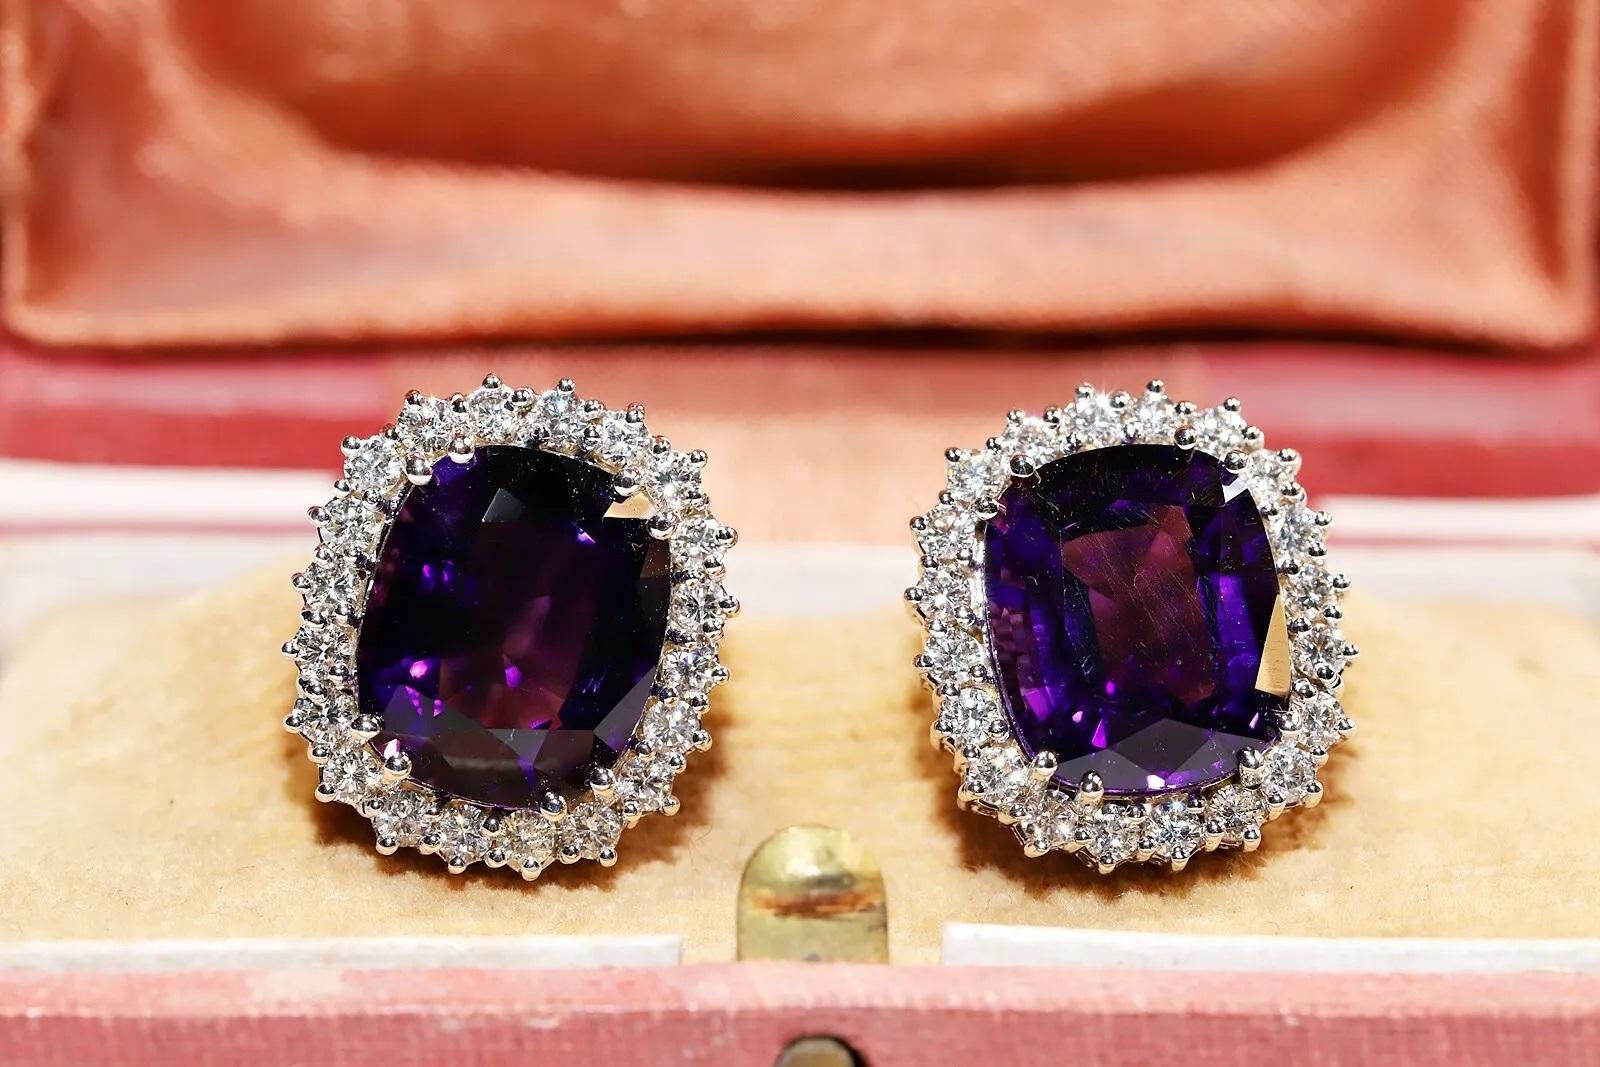 In very good condition.
Total weight is 22 grams.
Totally is diamond  2 carat.
The diamond is has is diamond H-I color and vs-vvs.
Totally is amethyst about totally 20 carat.
Box is not included.
Please contact for any questions.